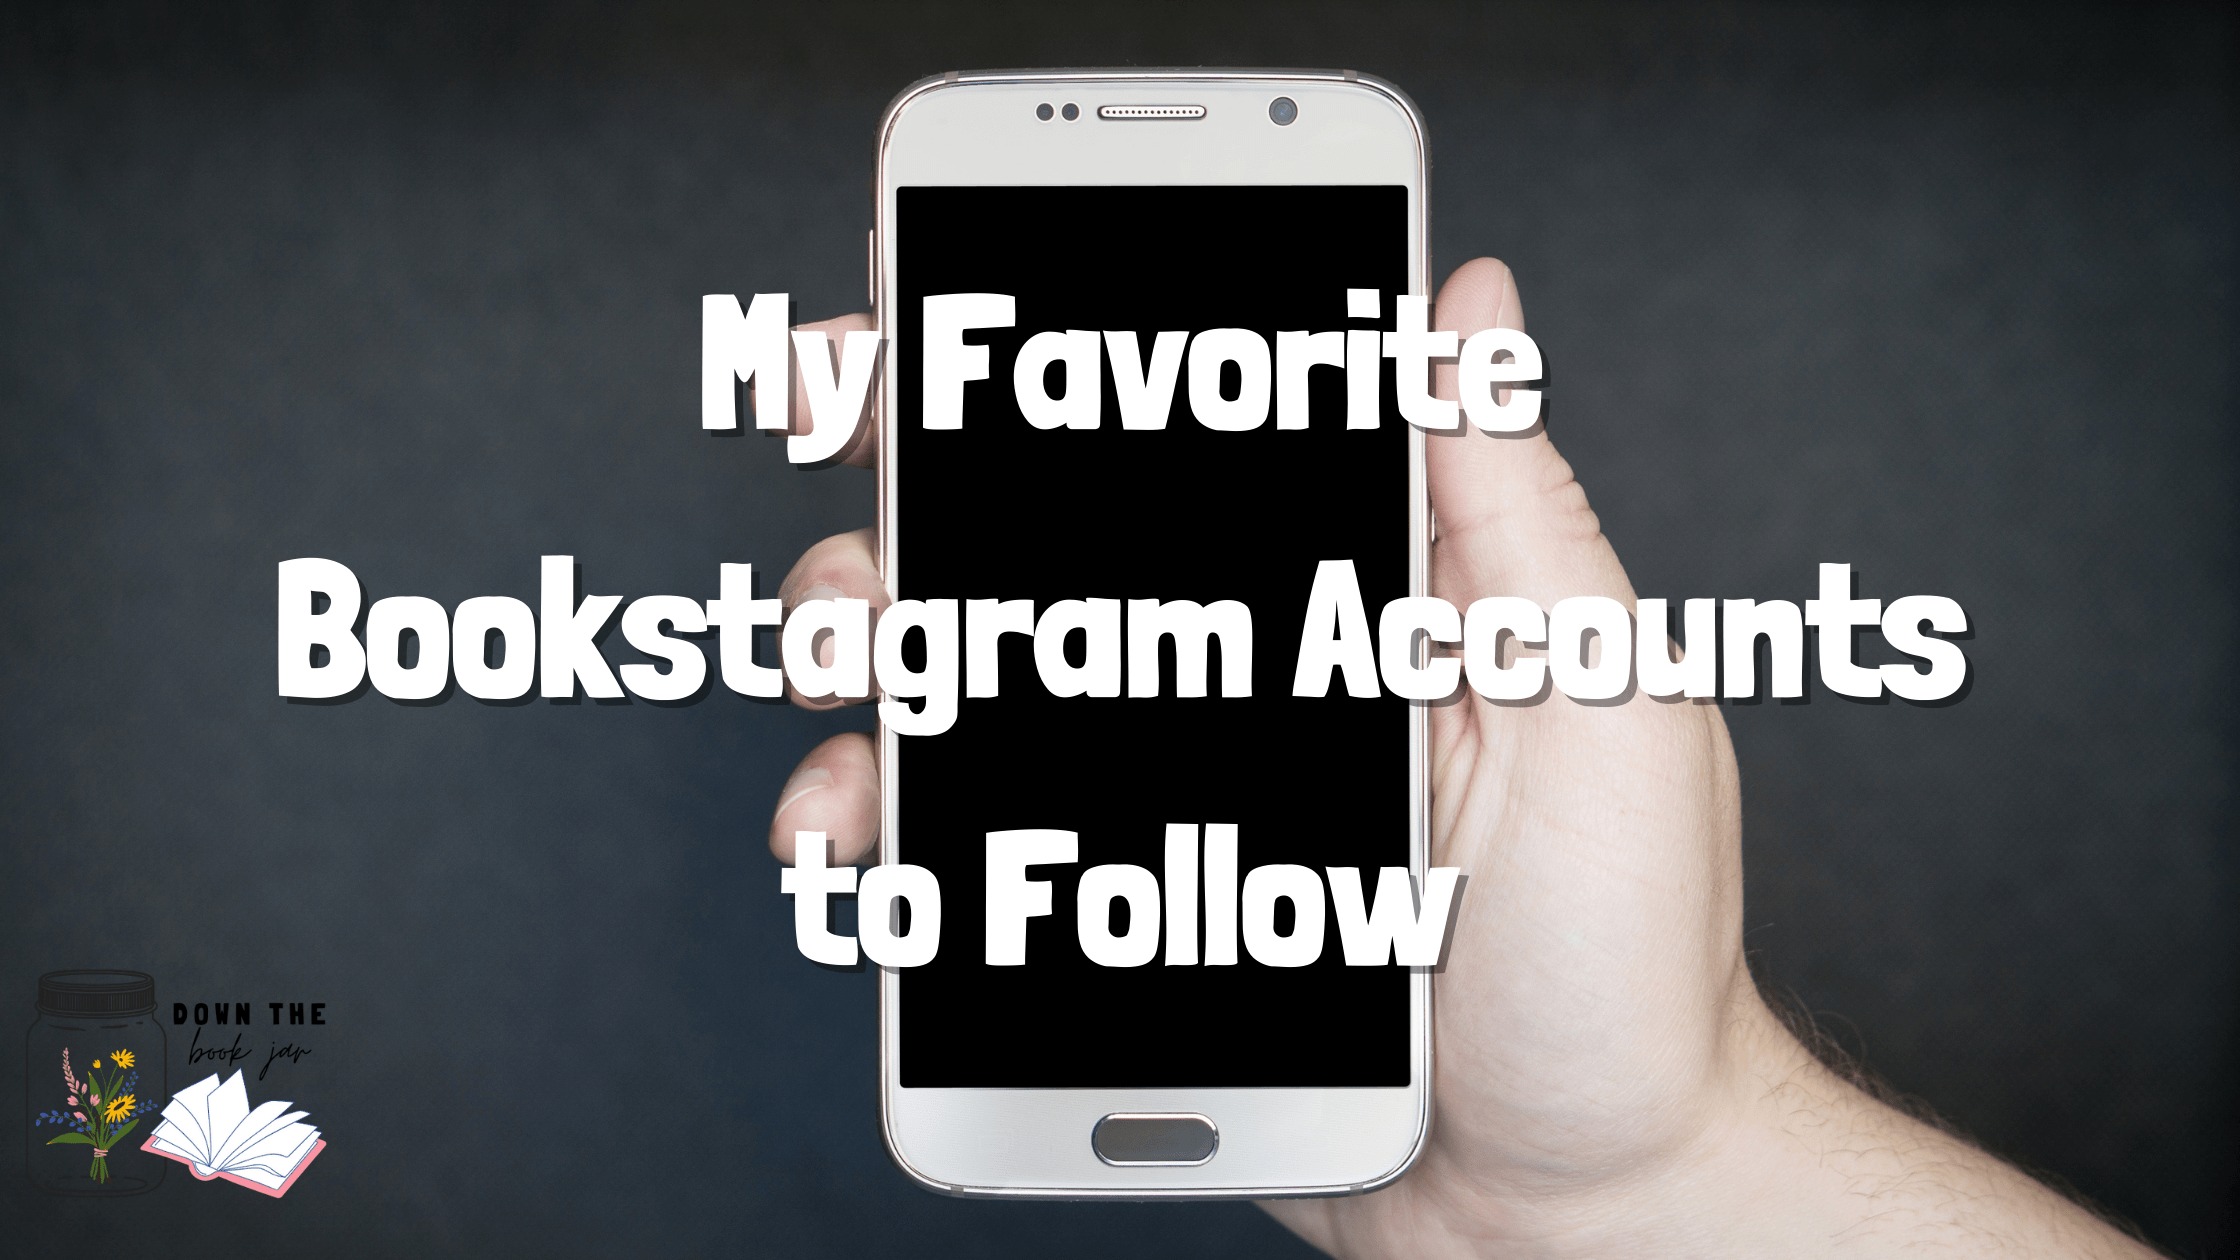 My Favorite Bookstagram Accounts to Follow